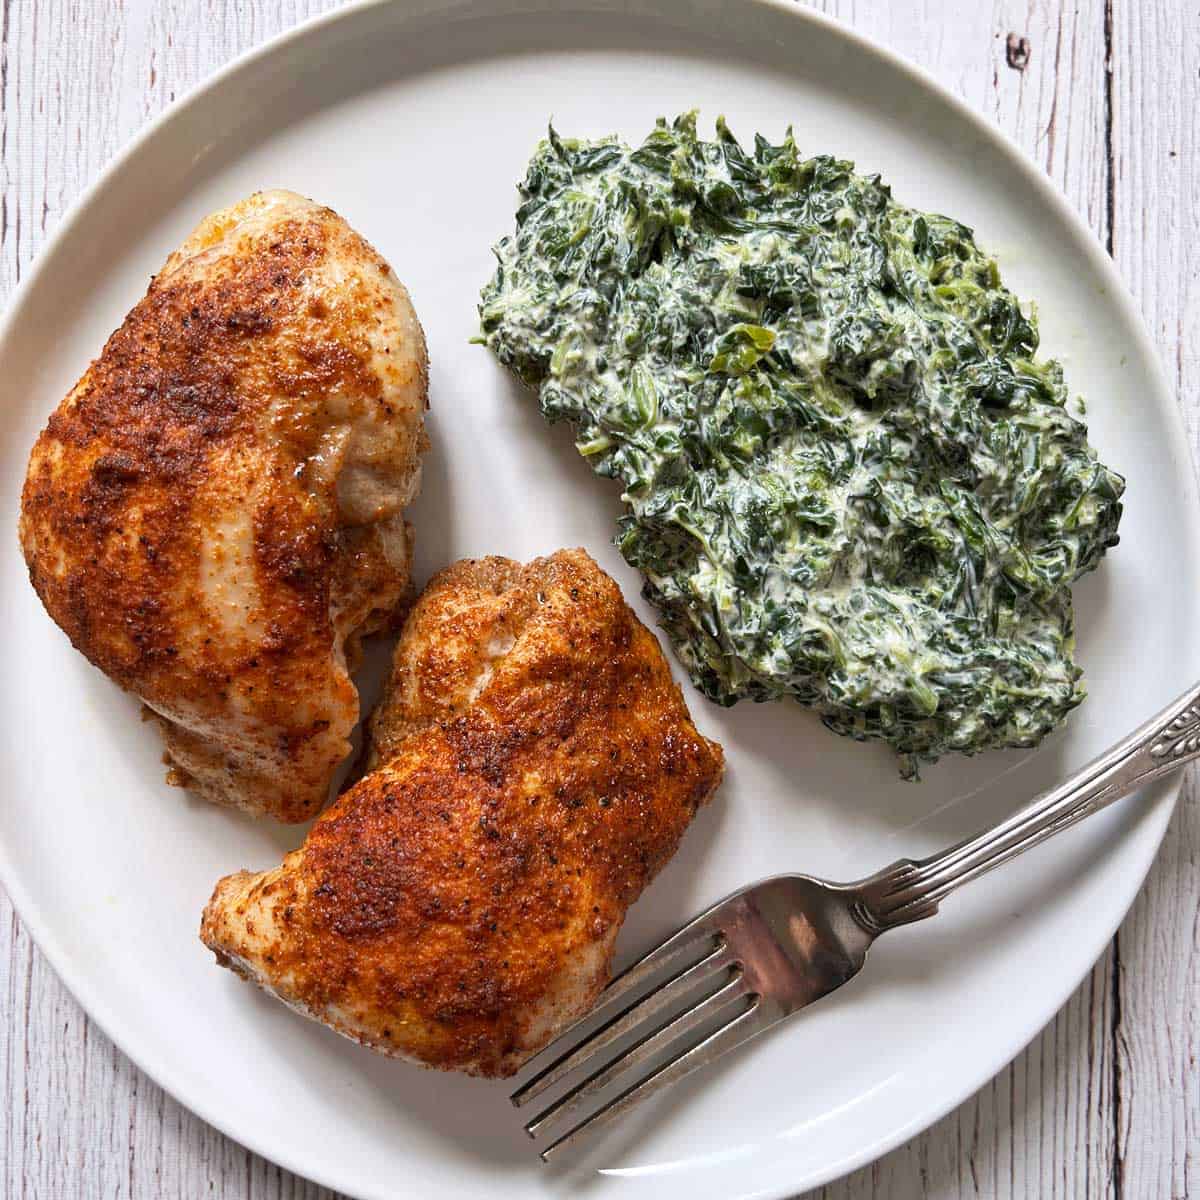 Creamed spinach is served as a side dish to boneless chicken thighs.